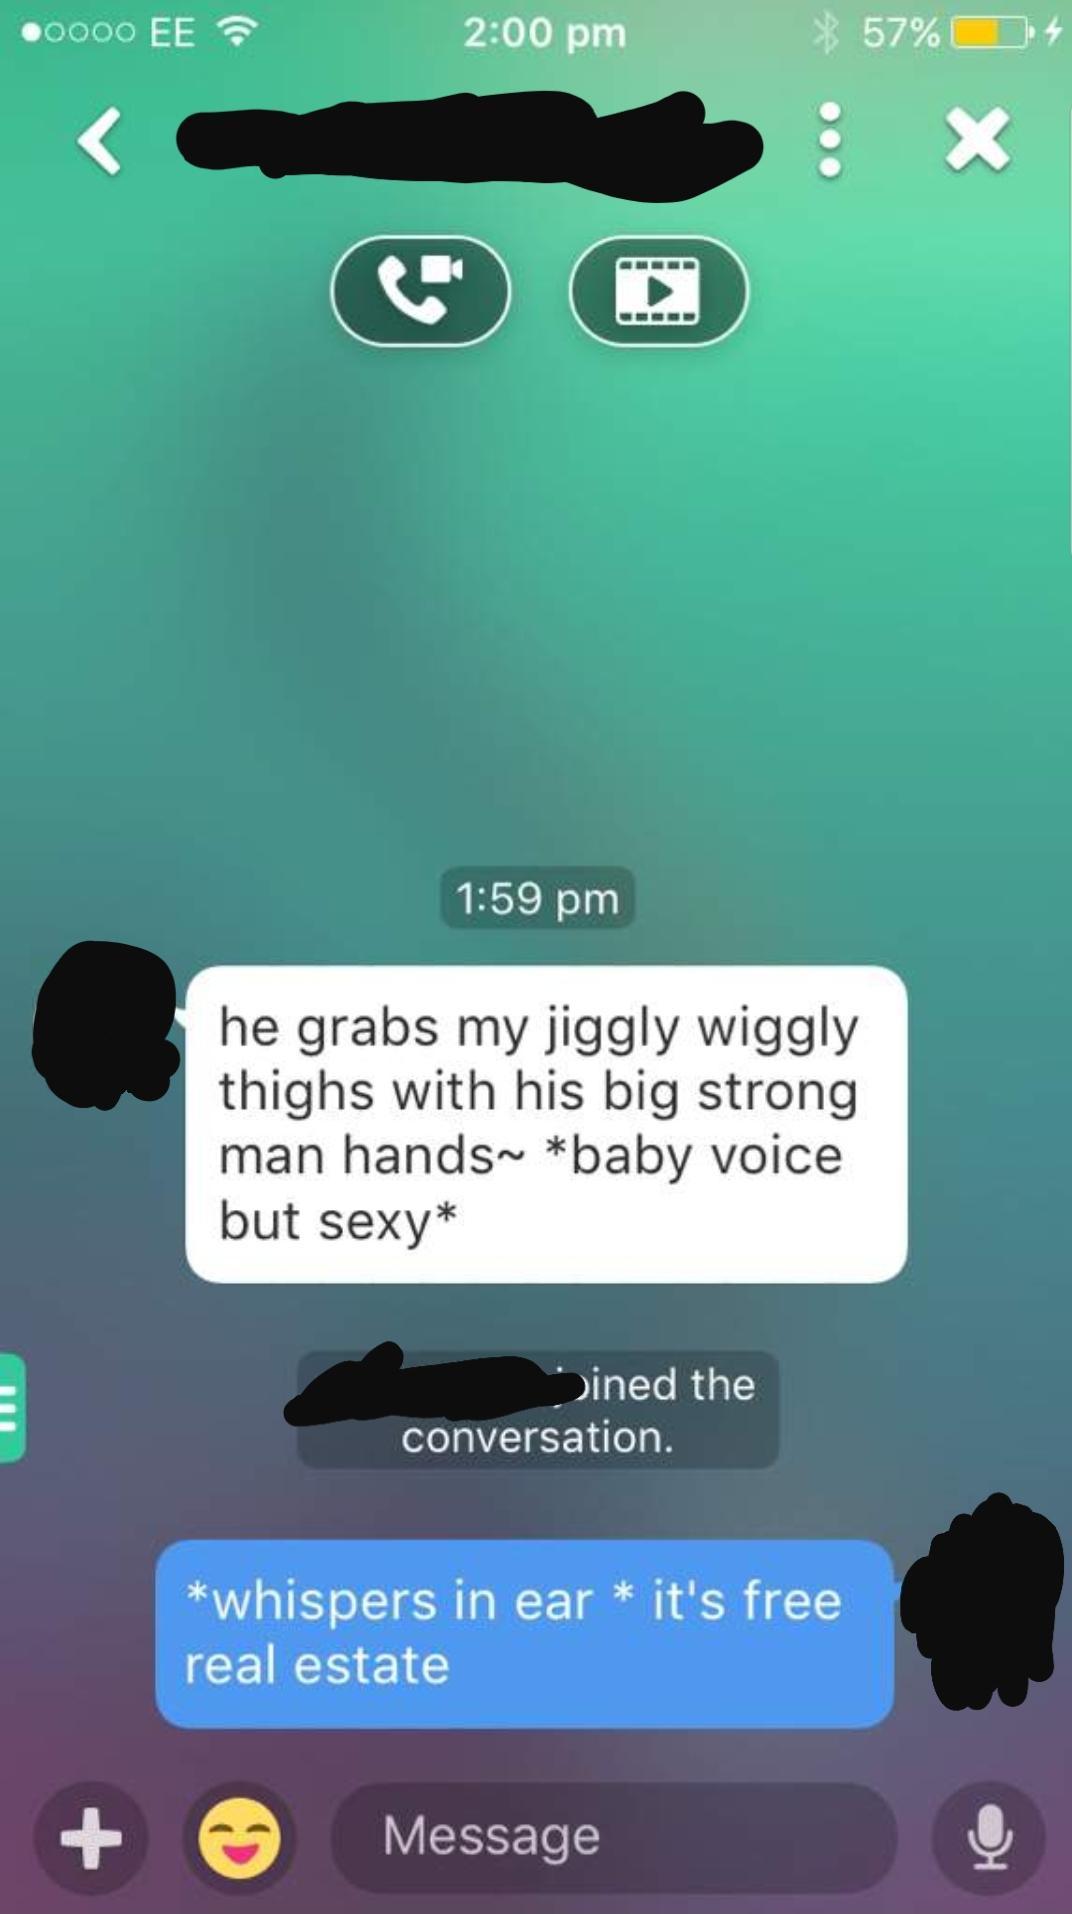 he grabbed my jiggly wiggly thigh - 0000 Ee 57% O4 he grabs my jiggly wiggly thighs with his big strong man hands~ baby voice but sexy 11 Dined the conversation. whispers in ear it's free real estate Message Message